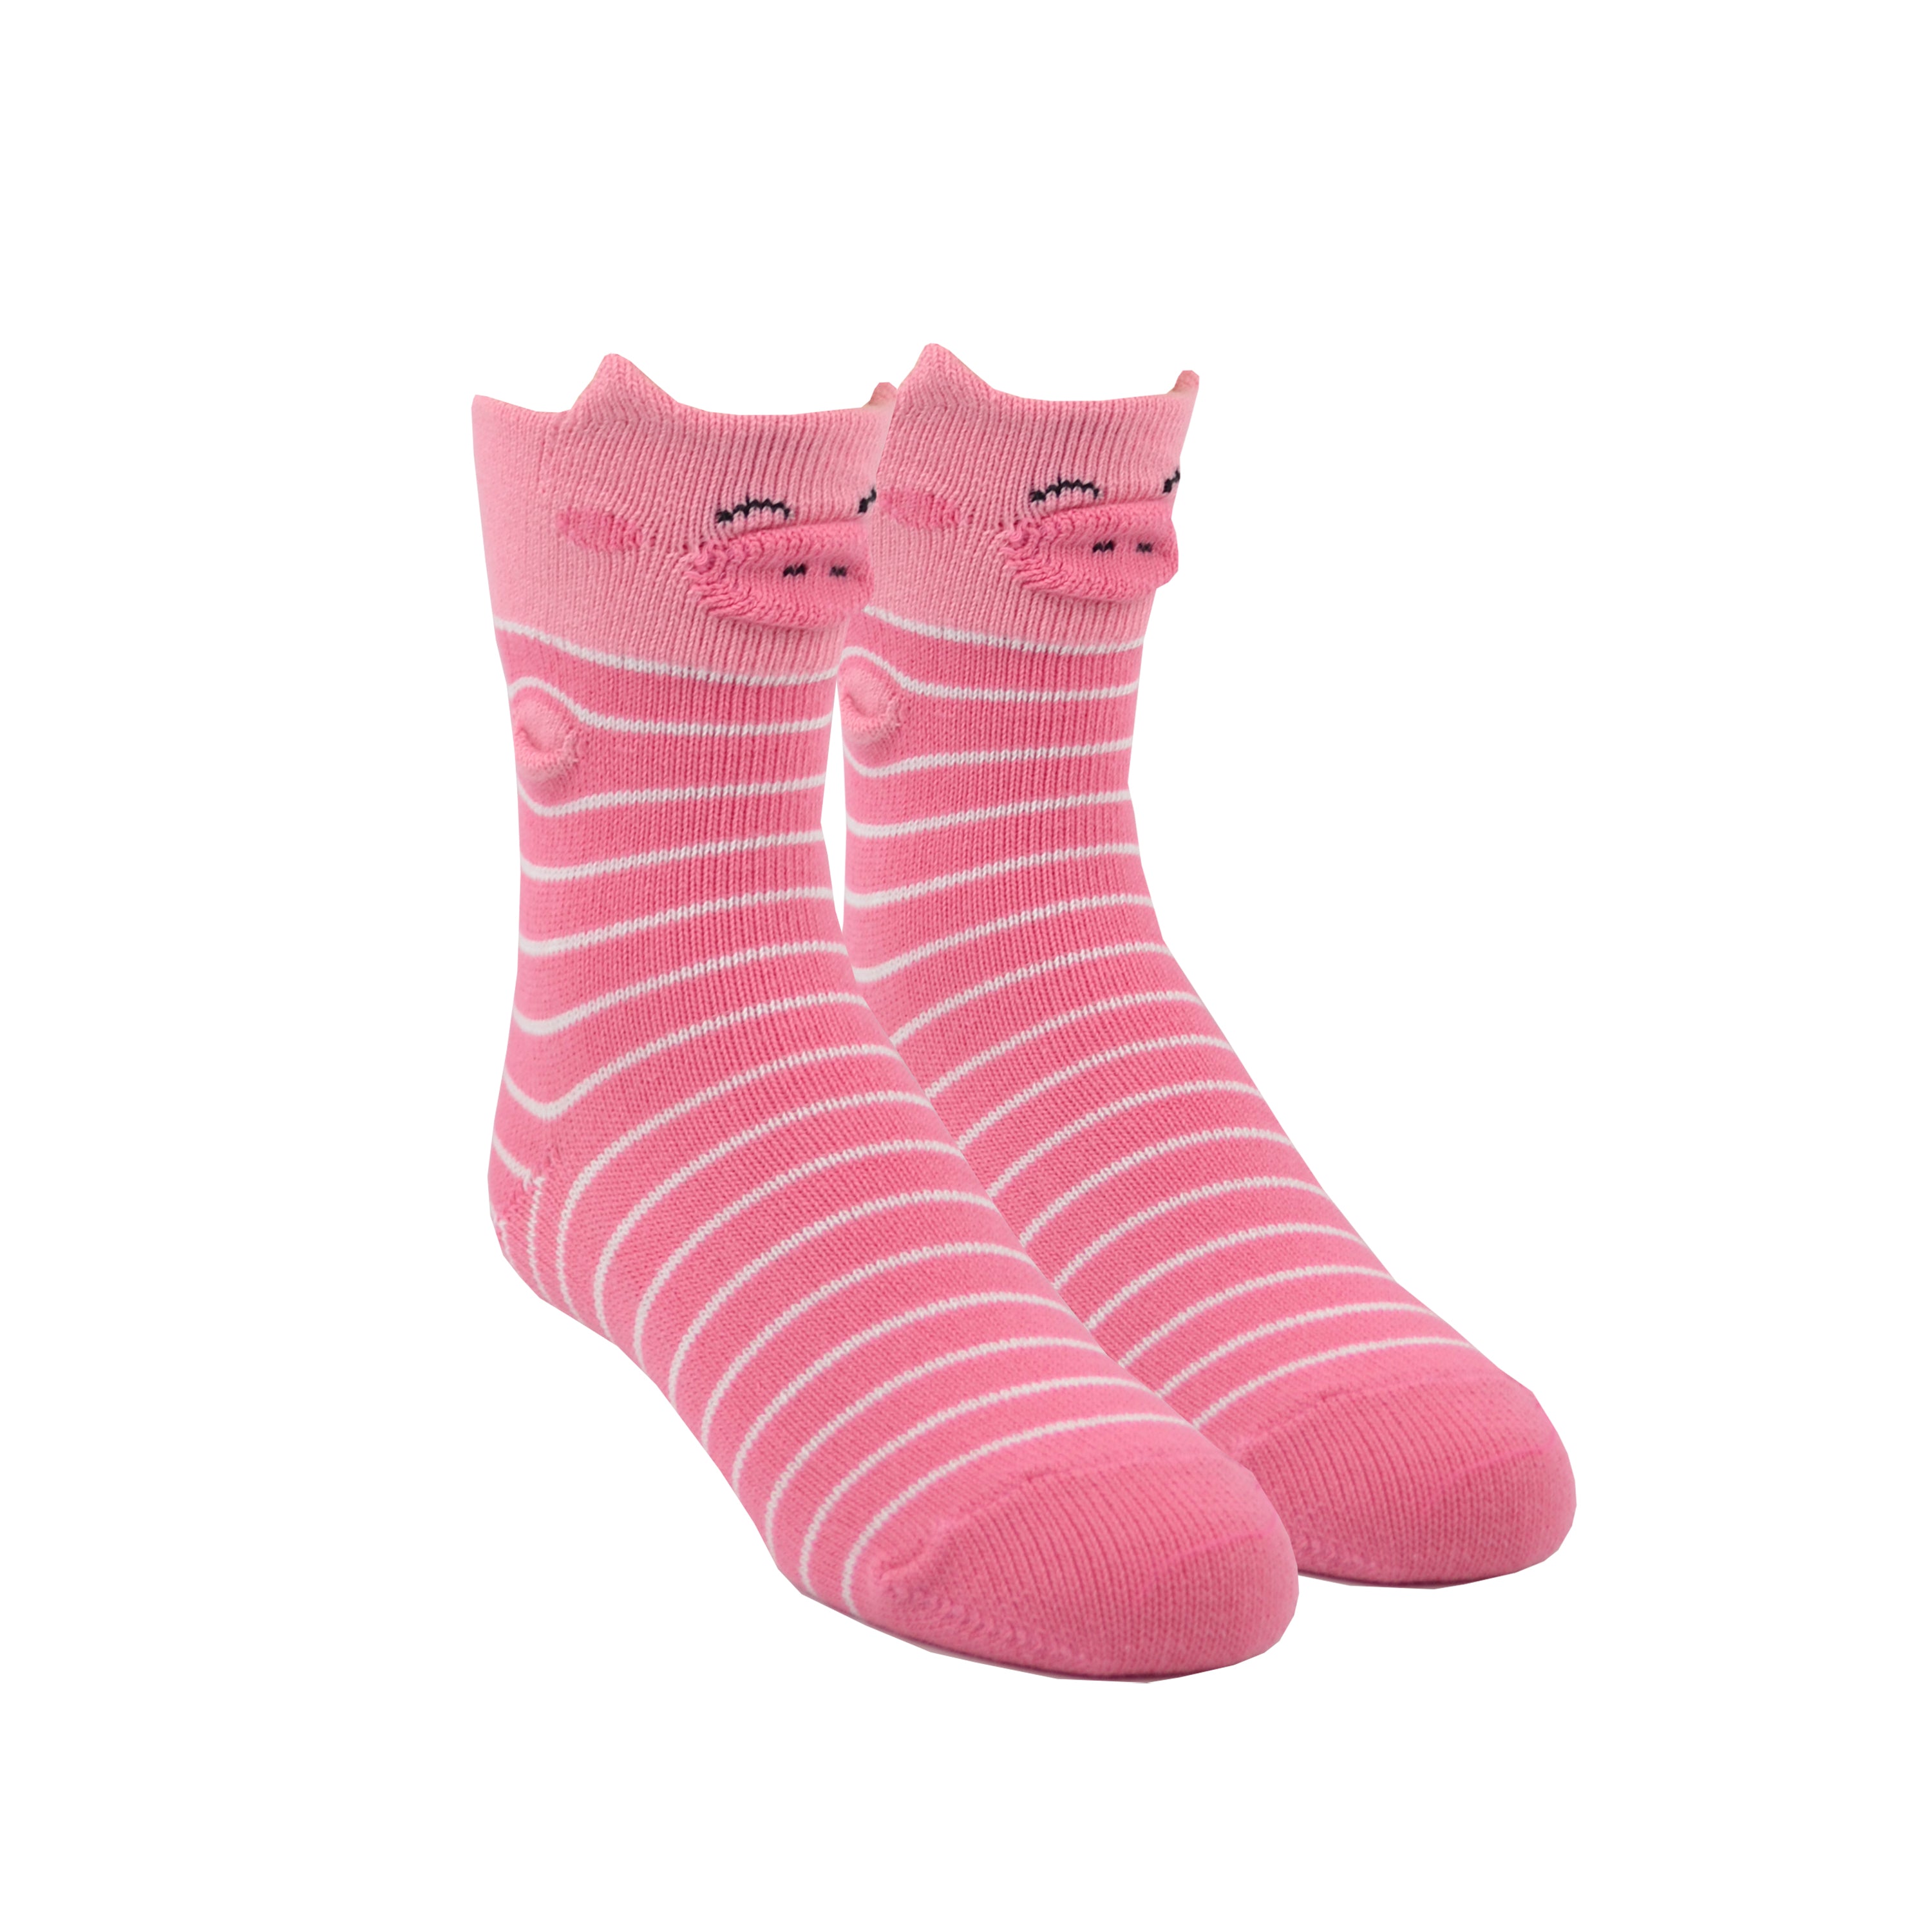 Shown on foot forms a pair of kids Foot Traffic cotton pig socks. These are pink with white stripes and feature 3D pig ears, arms, and snoot.